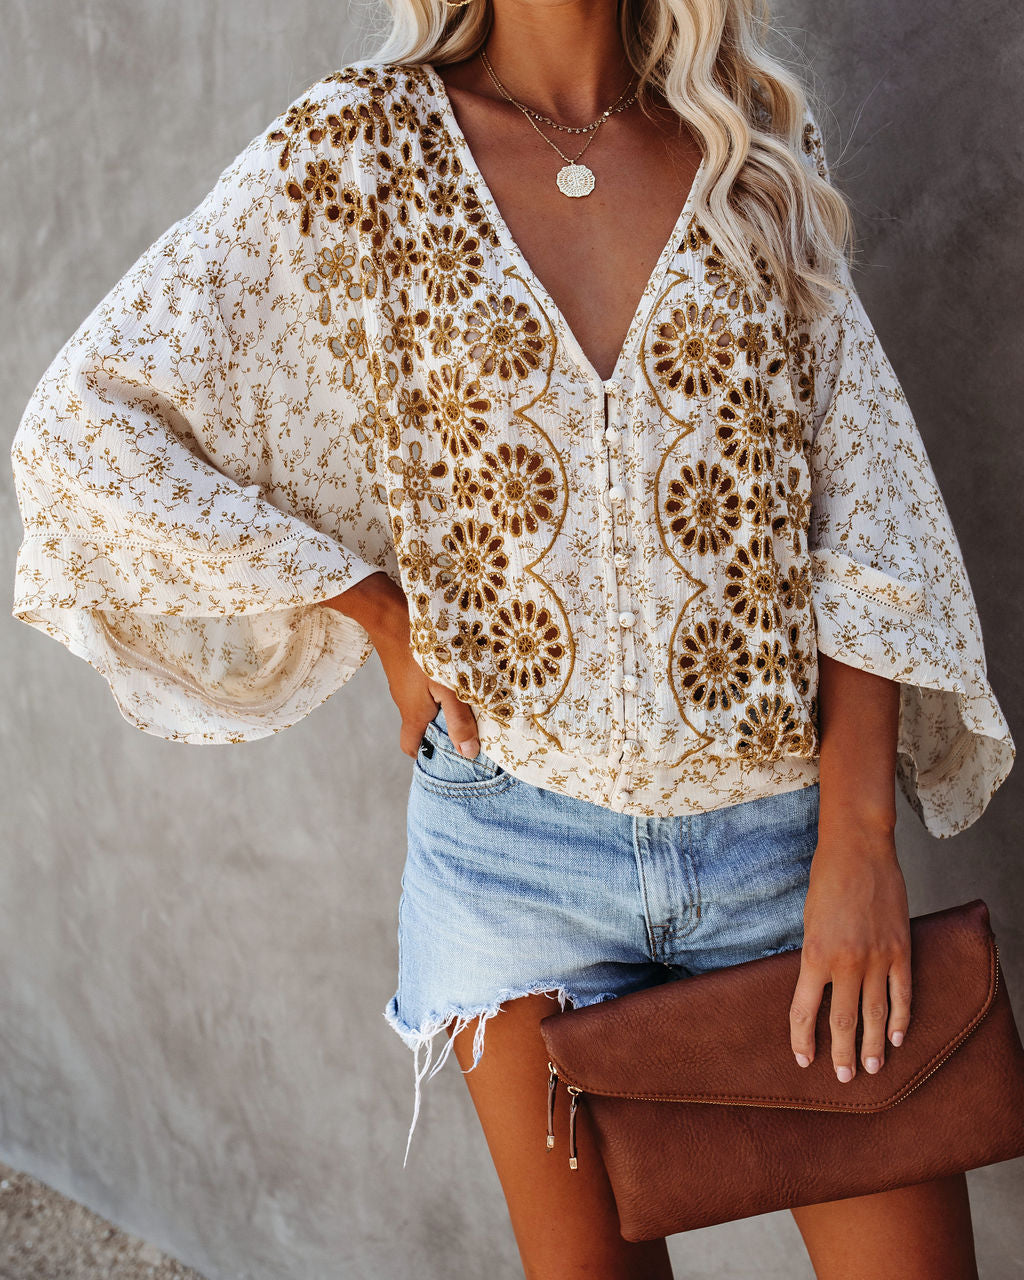 The Hills Are Alive Eyelet Kimono Top - Mustard